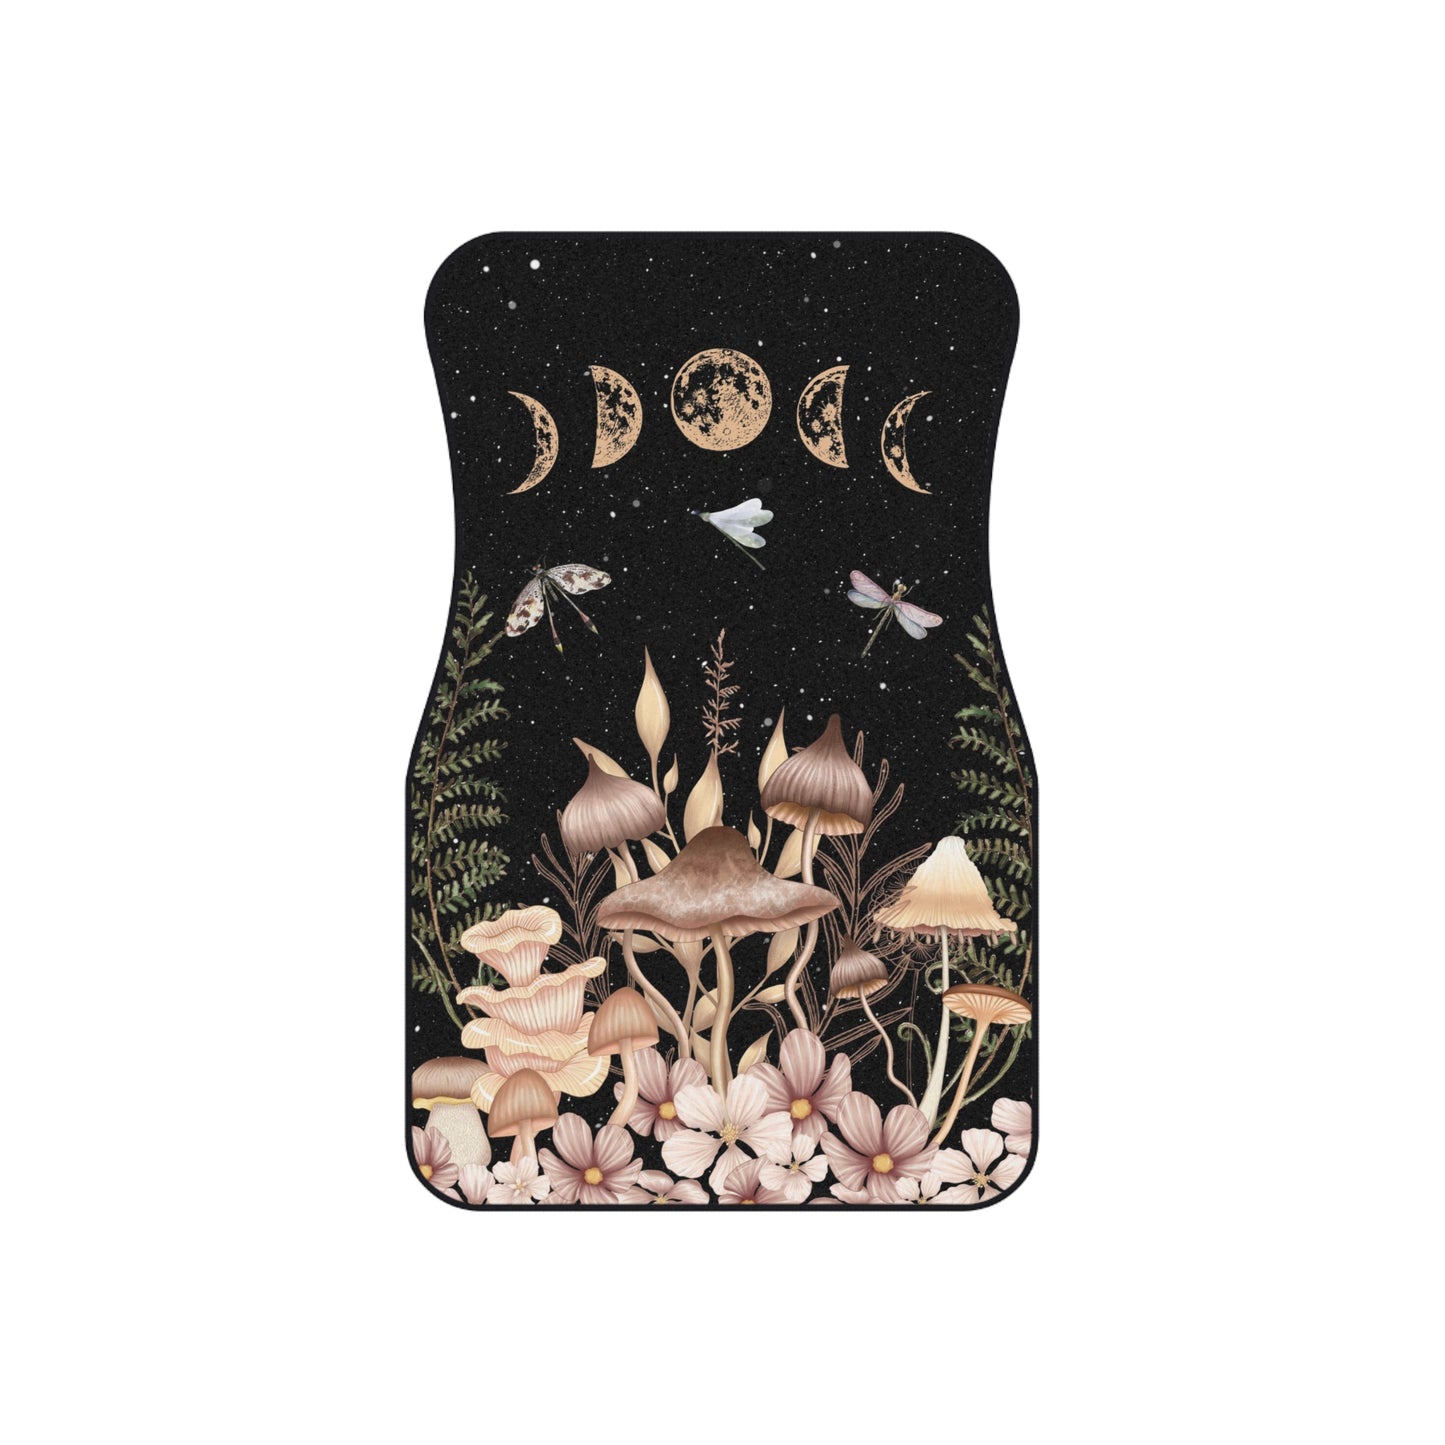 Elegant Mushrooms and Moon Phases Car Floor Mats Set of 4 Front and Back (USA)